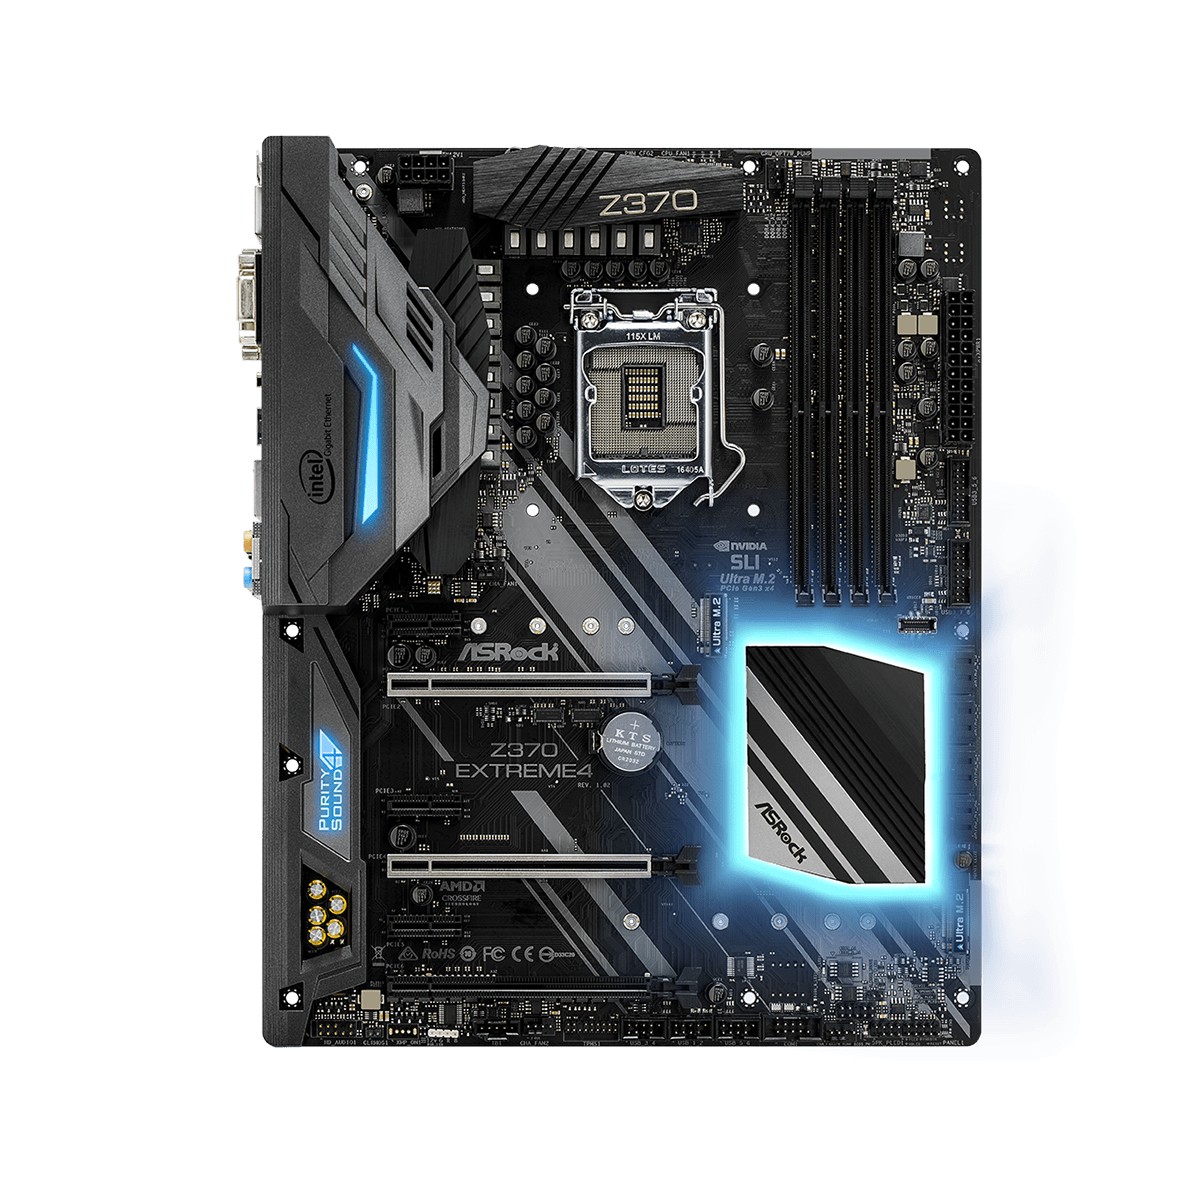 ASRock Z370 Extreme4 - タブレット